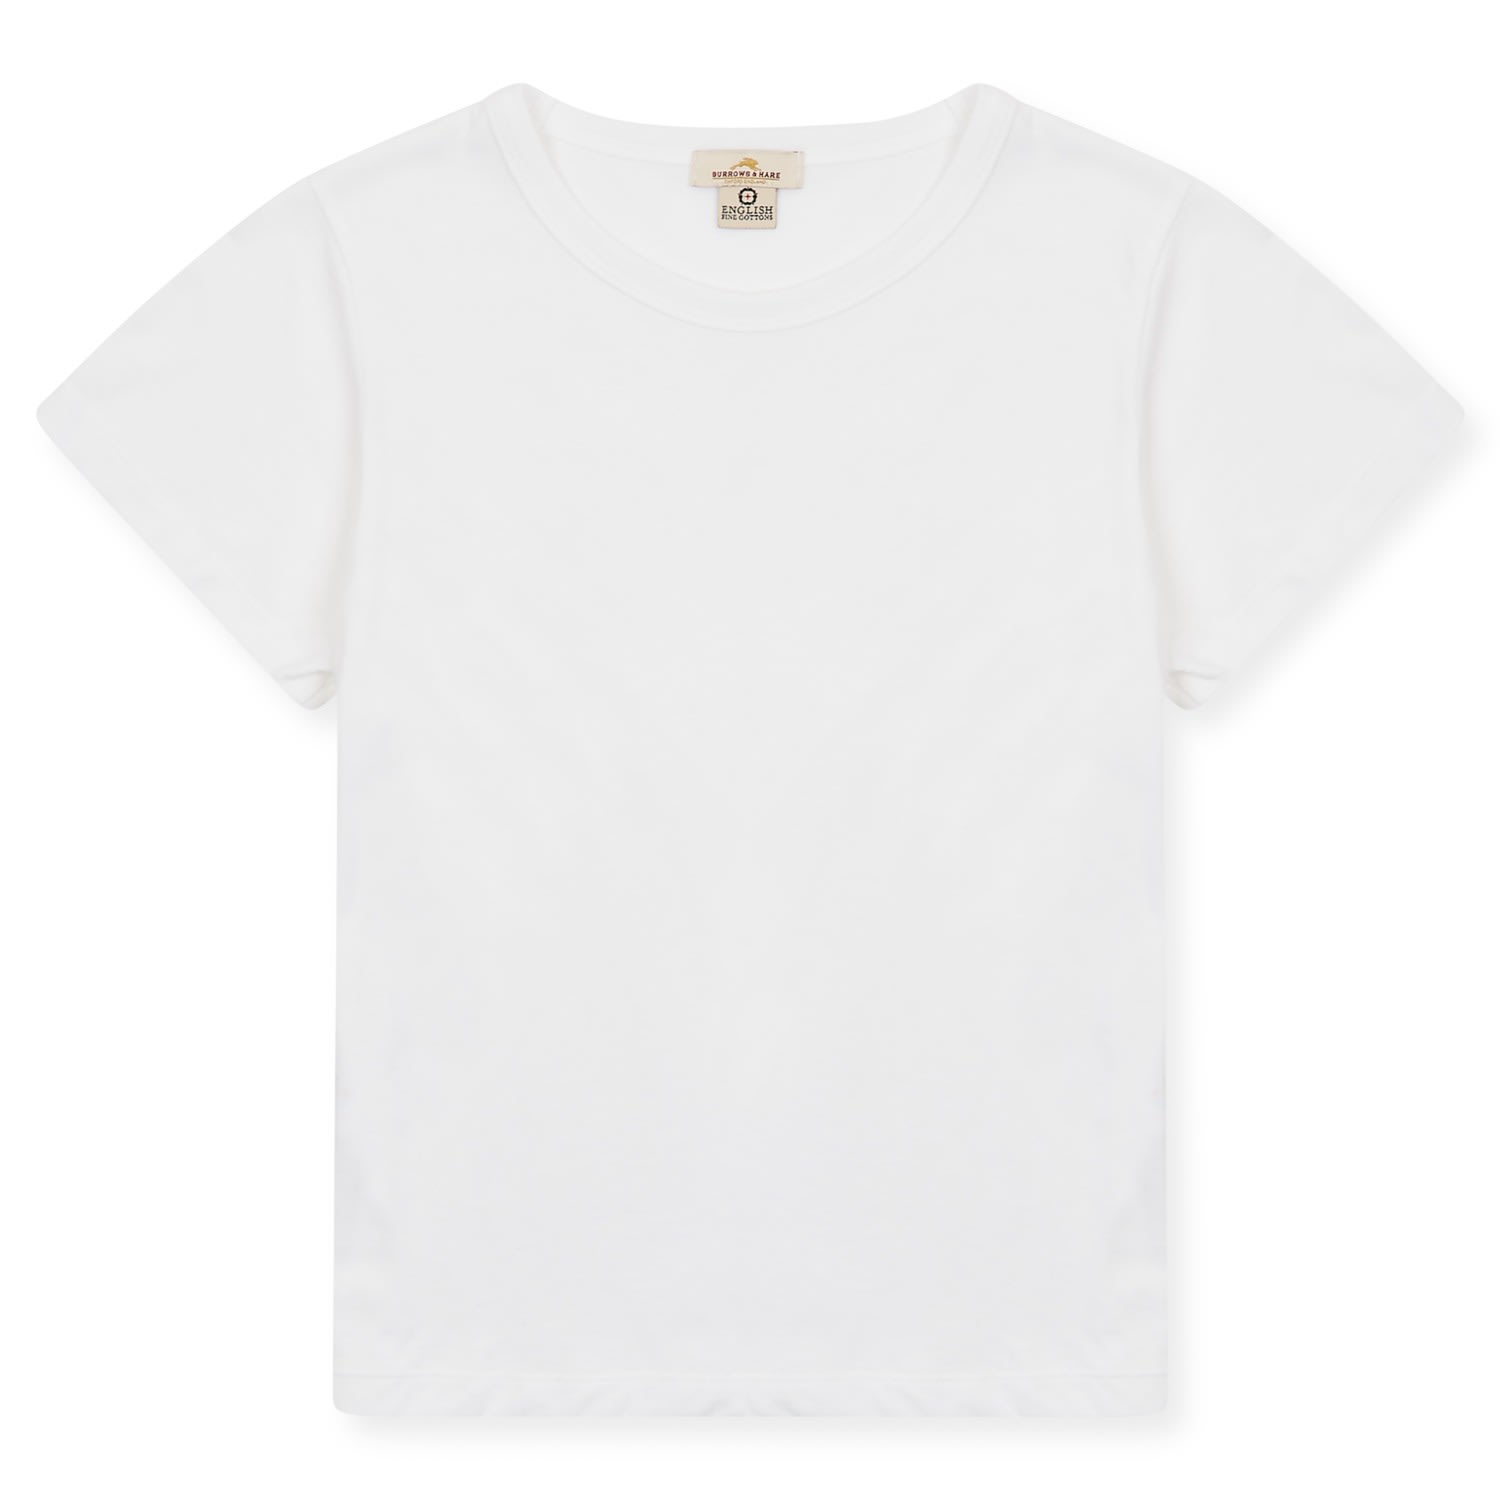 Women’s T-Shirt - White Extra Large Burrows & Hare